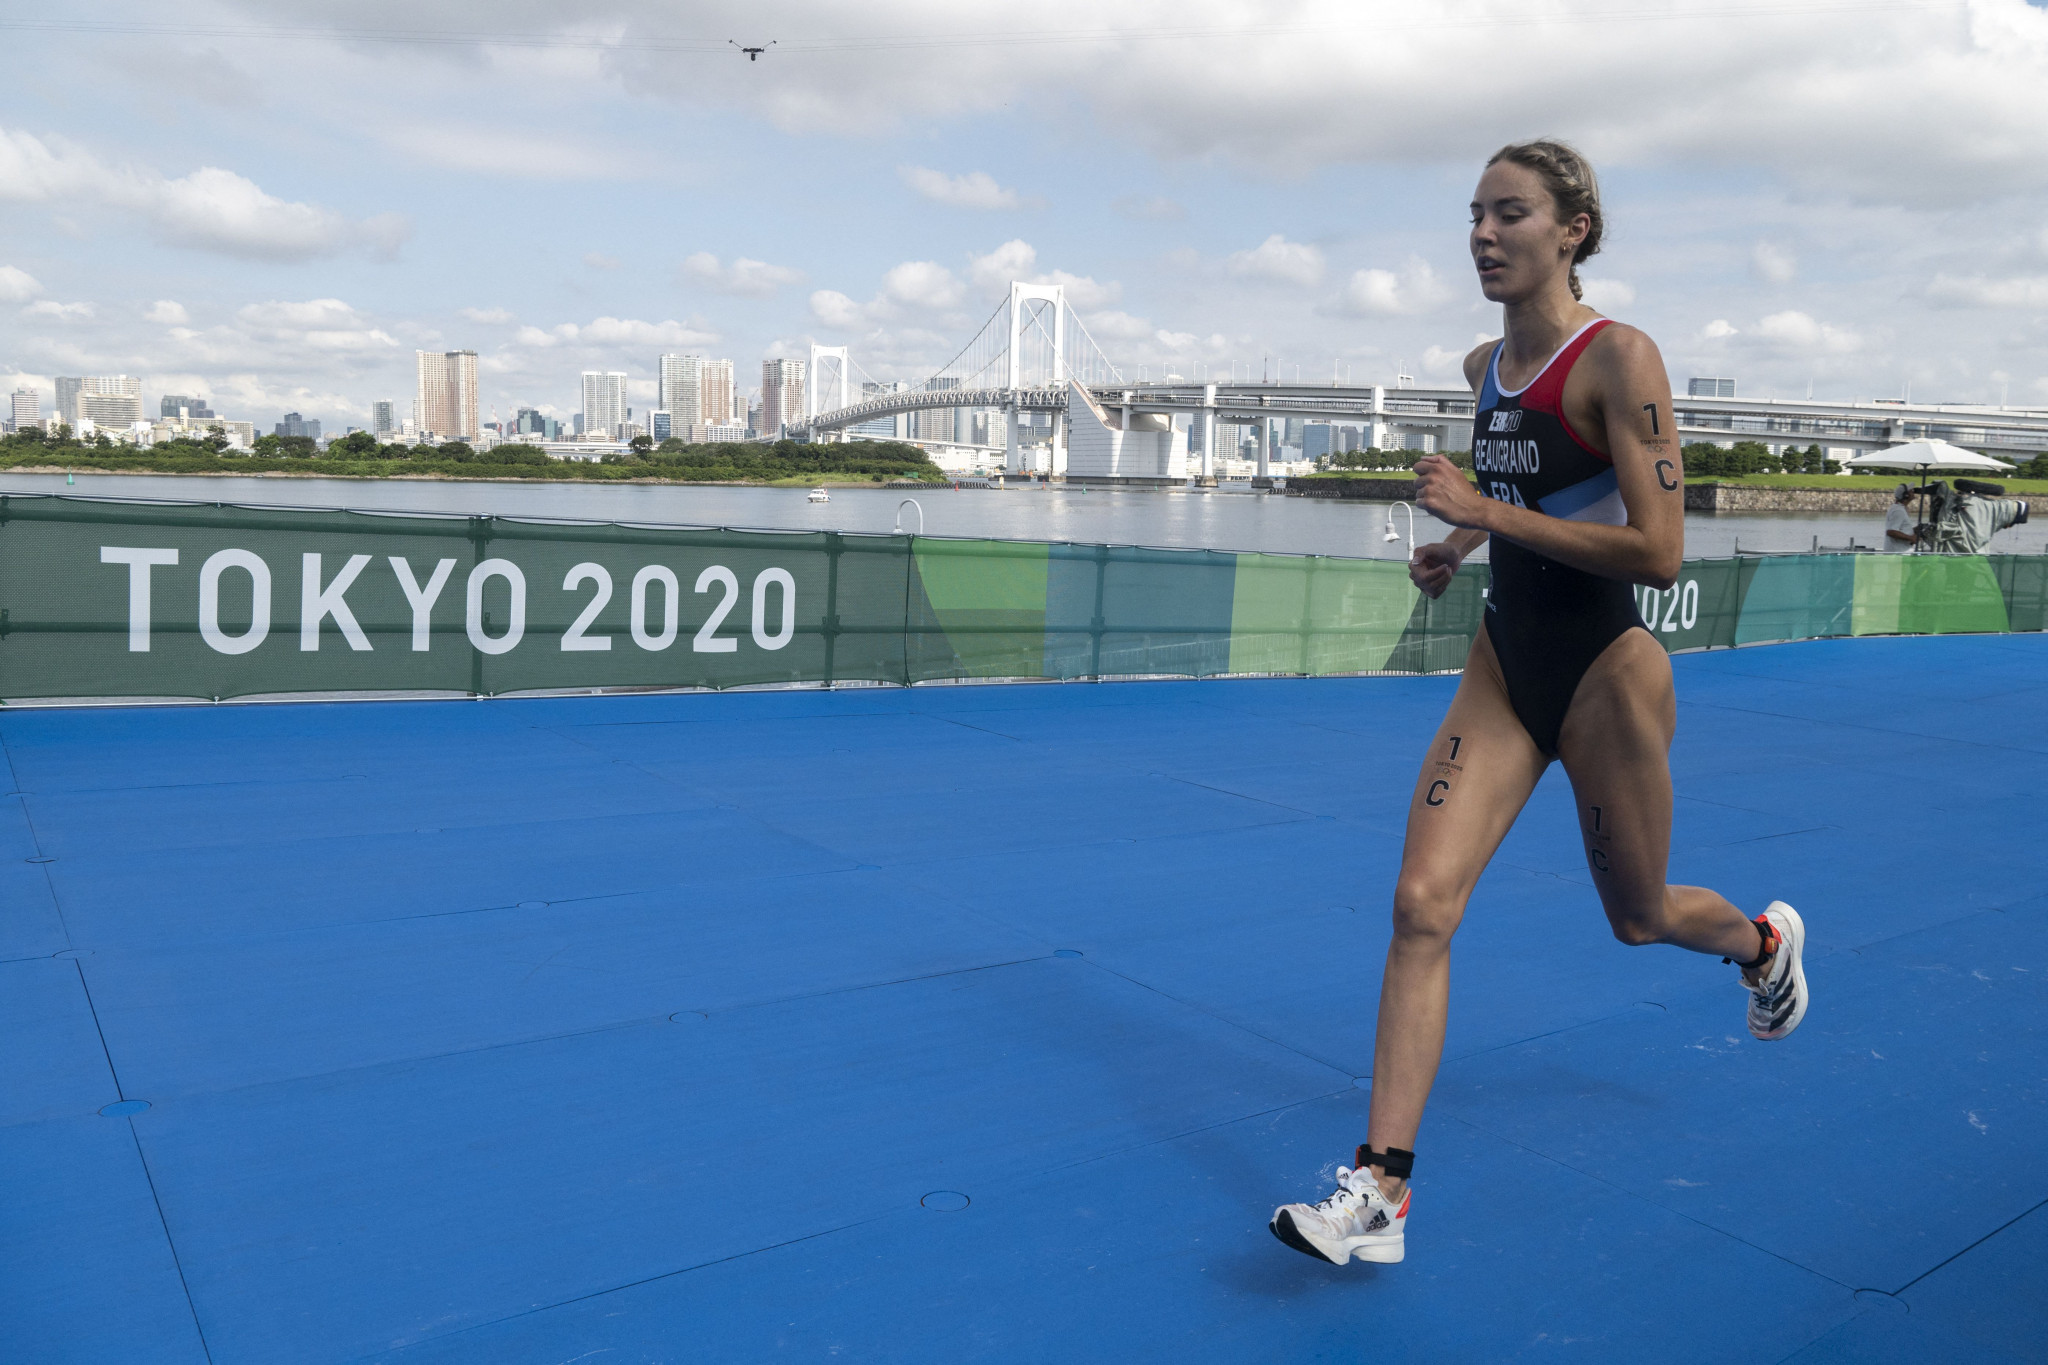 Olympic bronze medallist Cassandre Beaugrand won the women's event at the Arena Games Triathlon in London by more than 30 seconds ©Getty Images